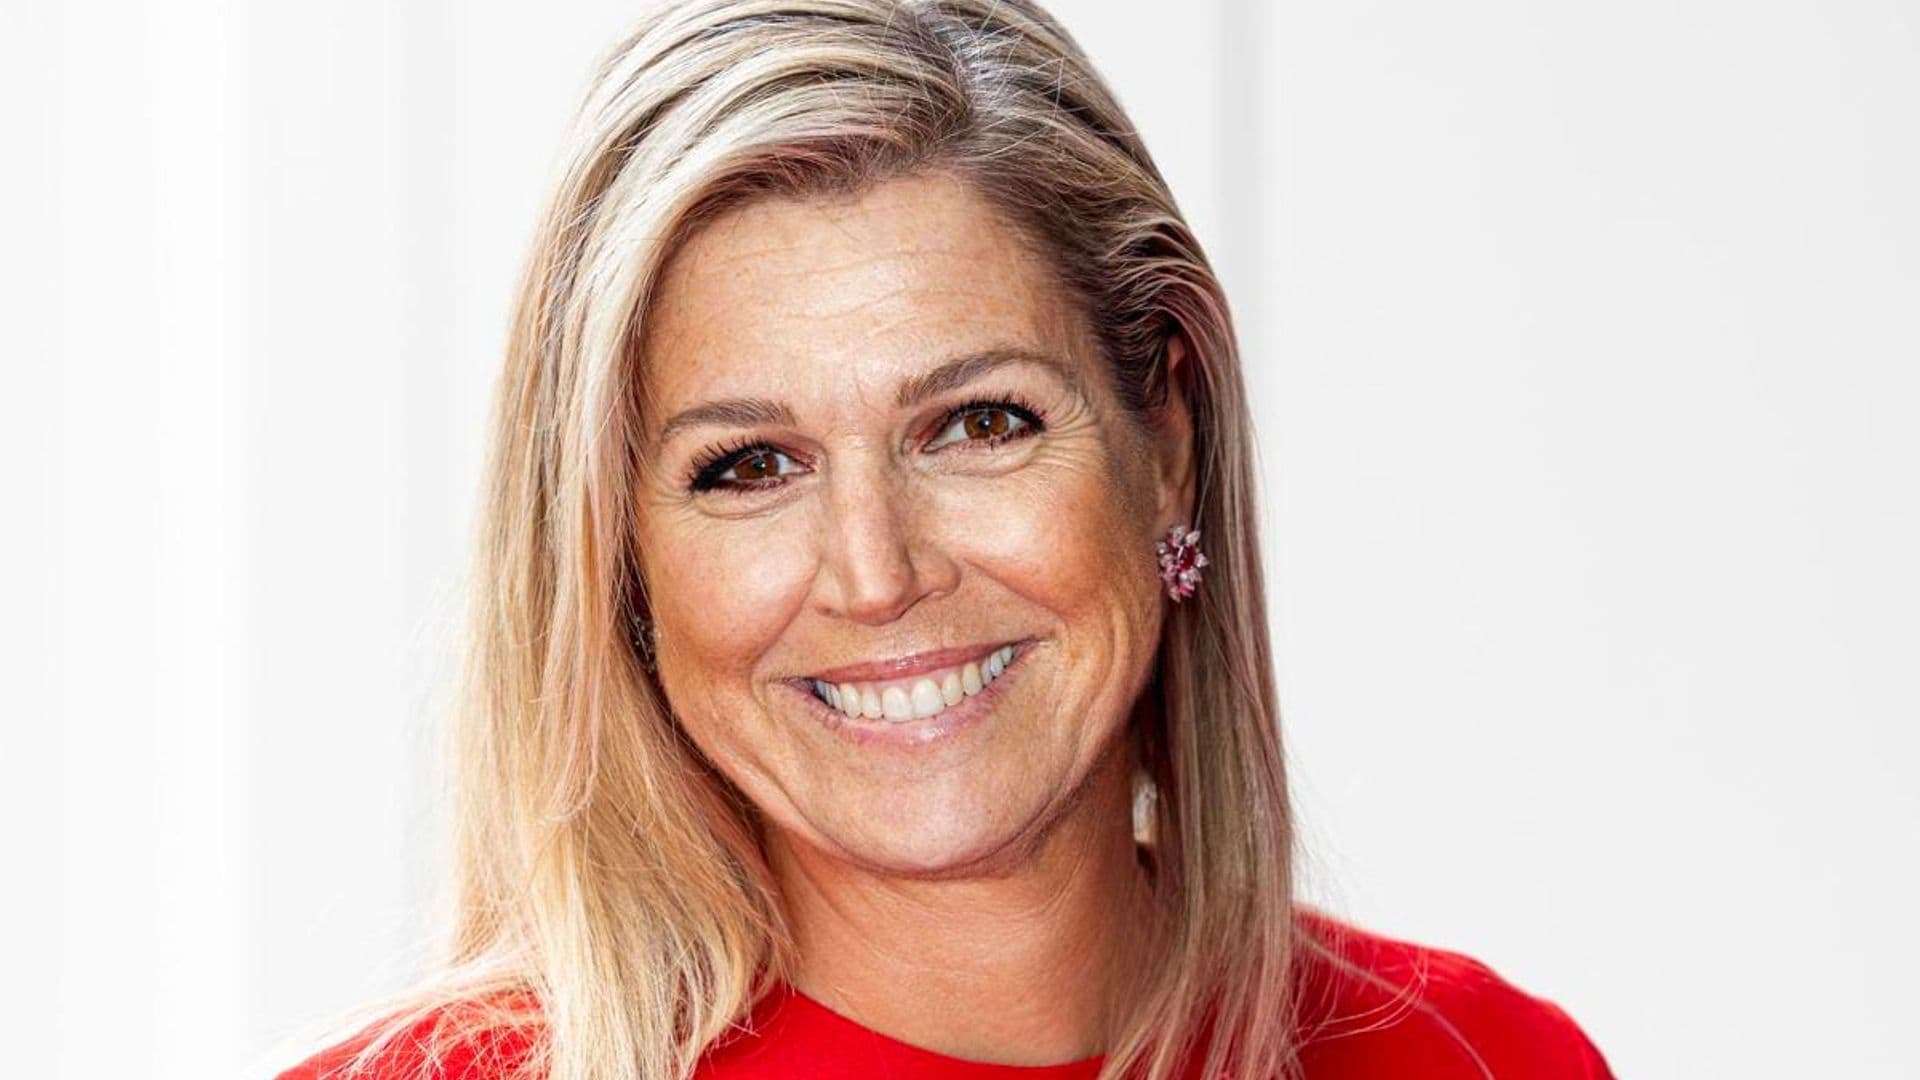 See Queen Maxima pose for an adorable photo with a hedgehog